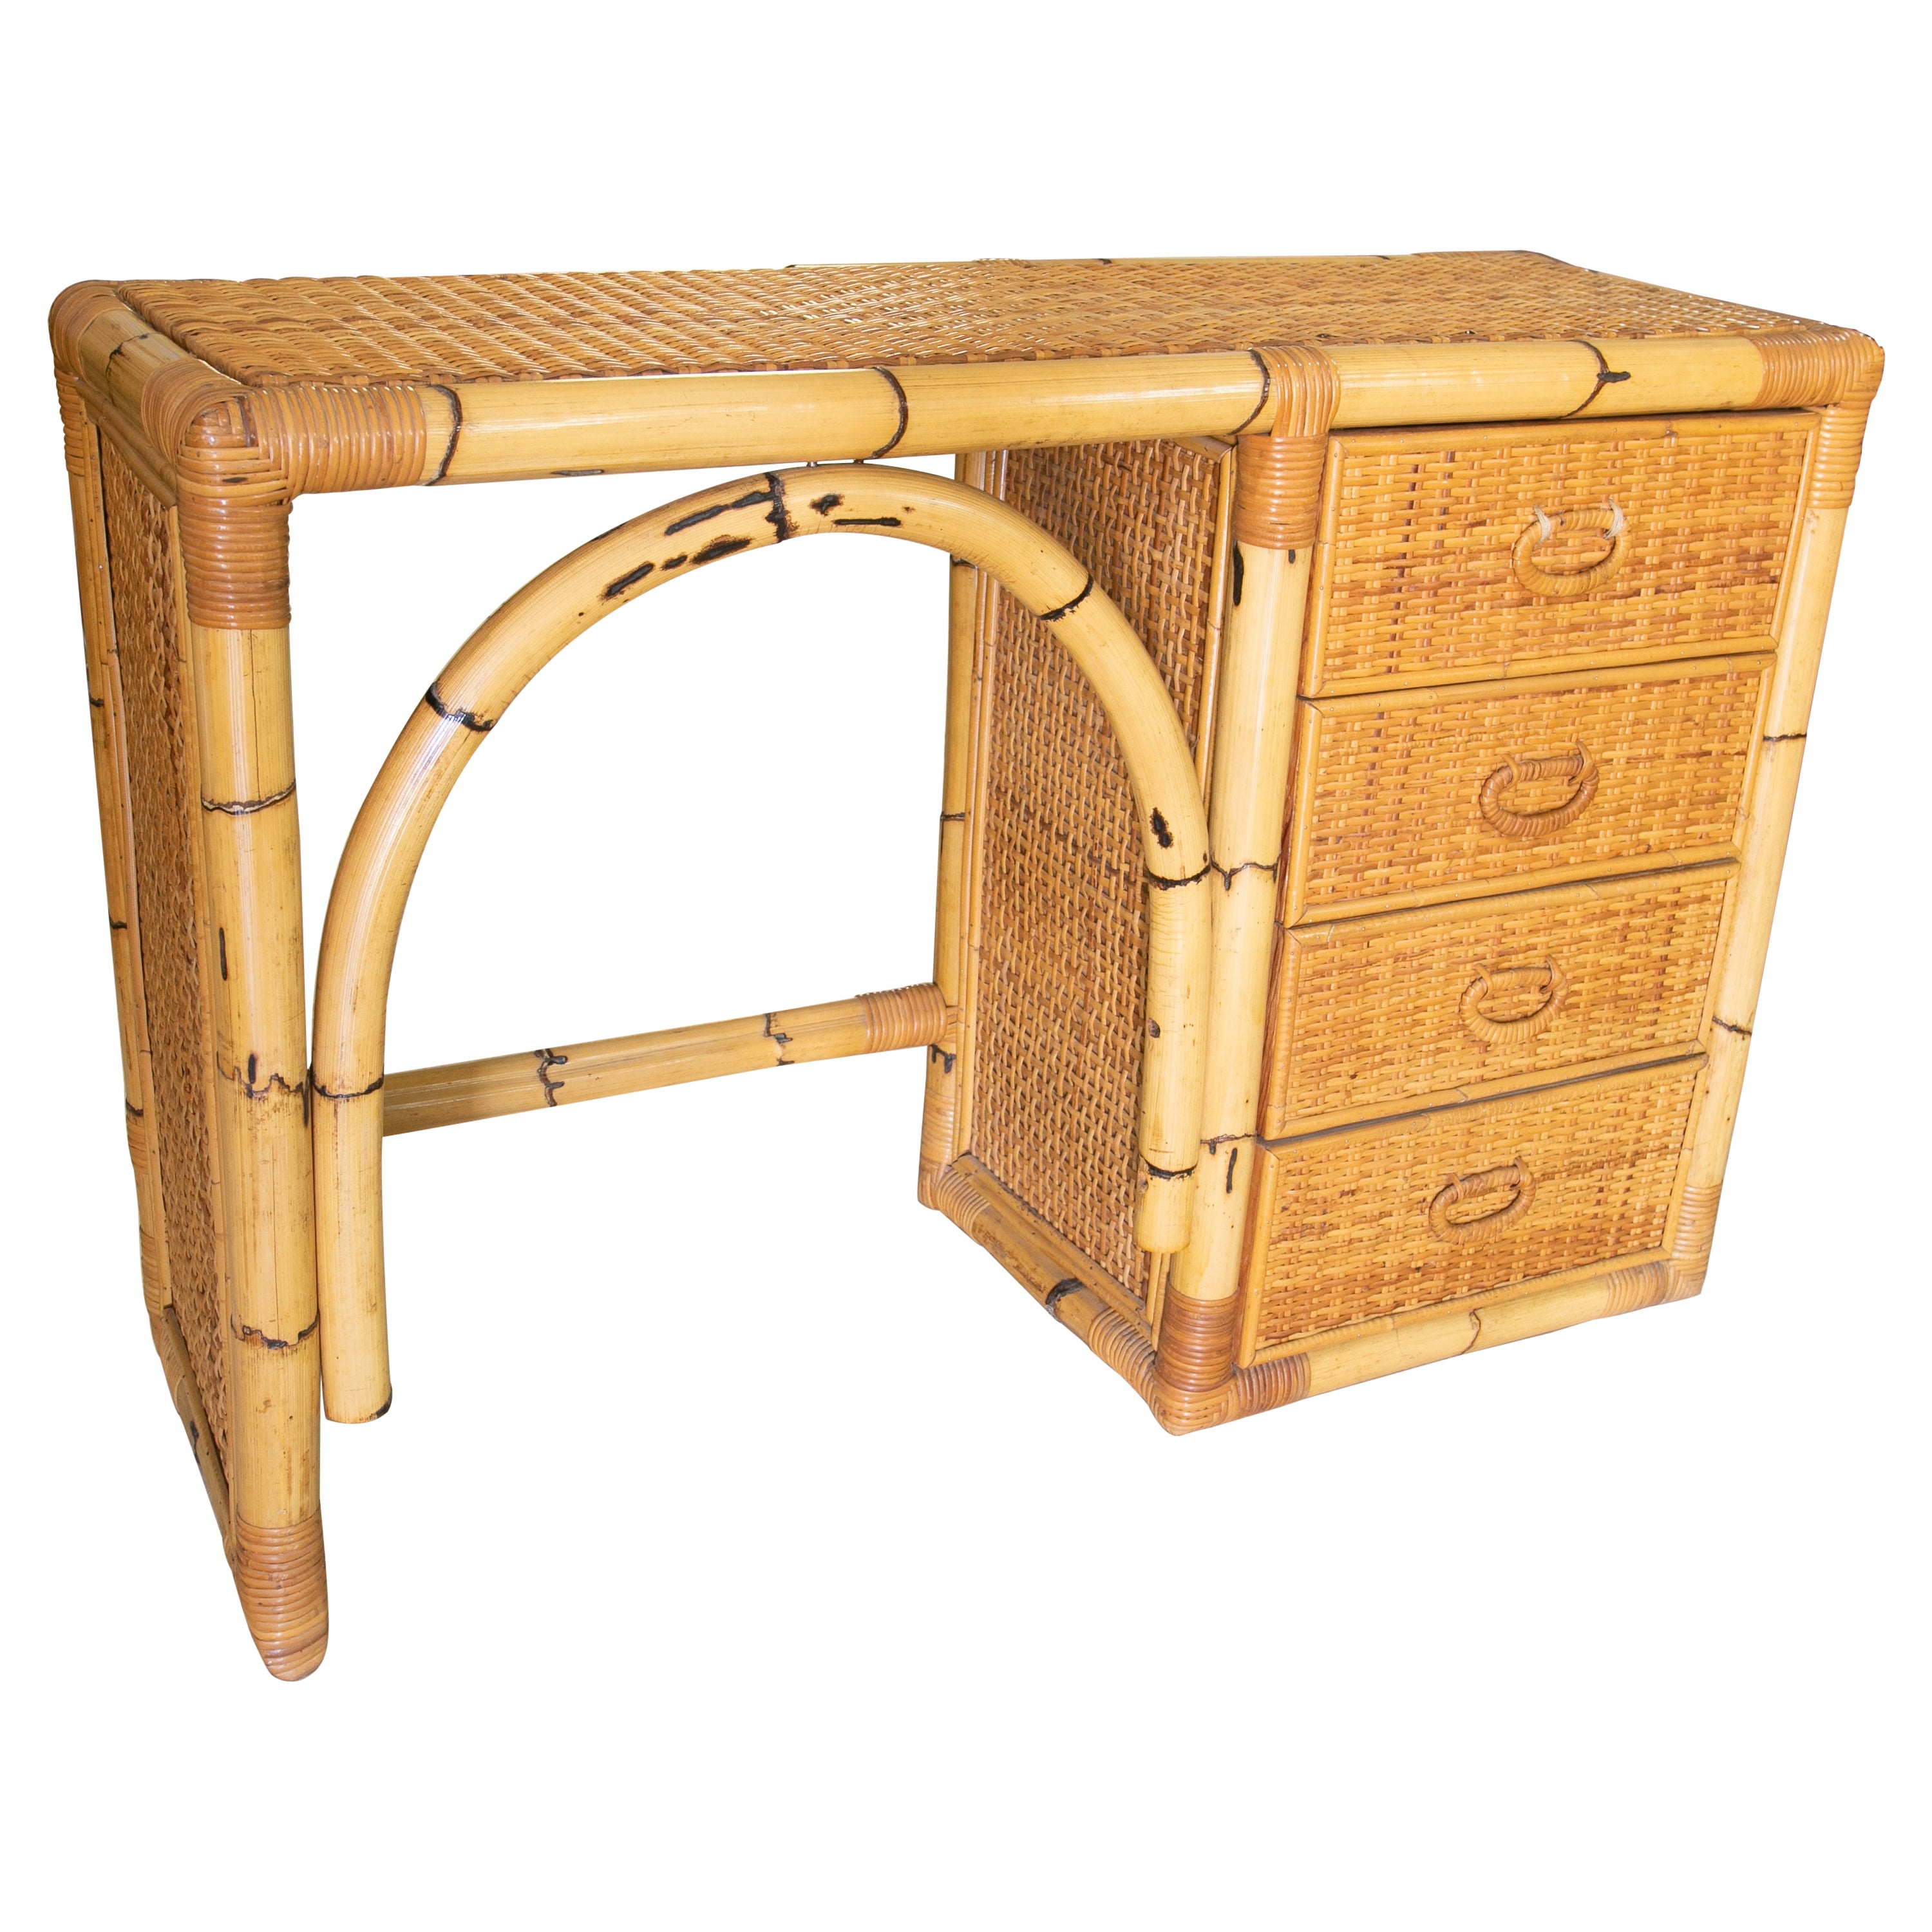 1970s Spanish Desk Made of Bamboo and Wicker with Four Drawers For Sale